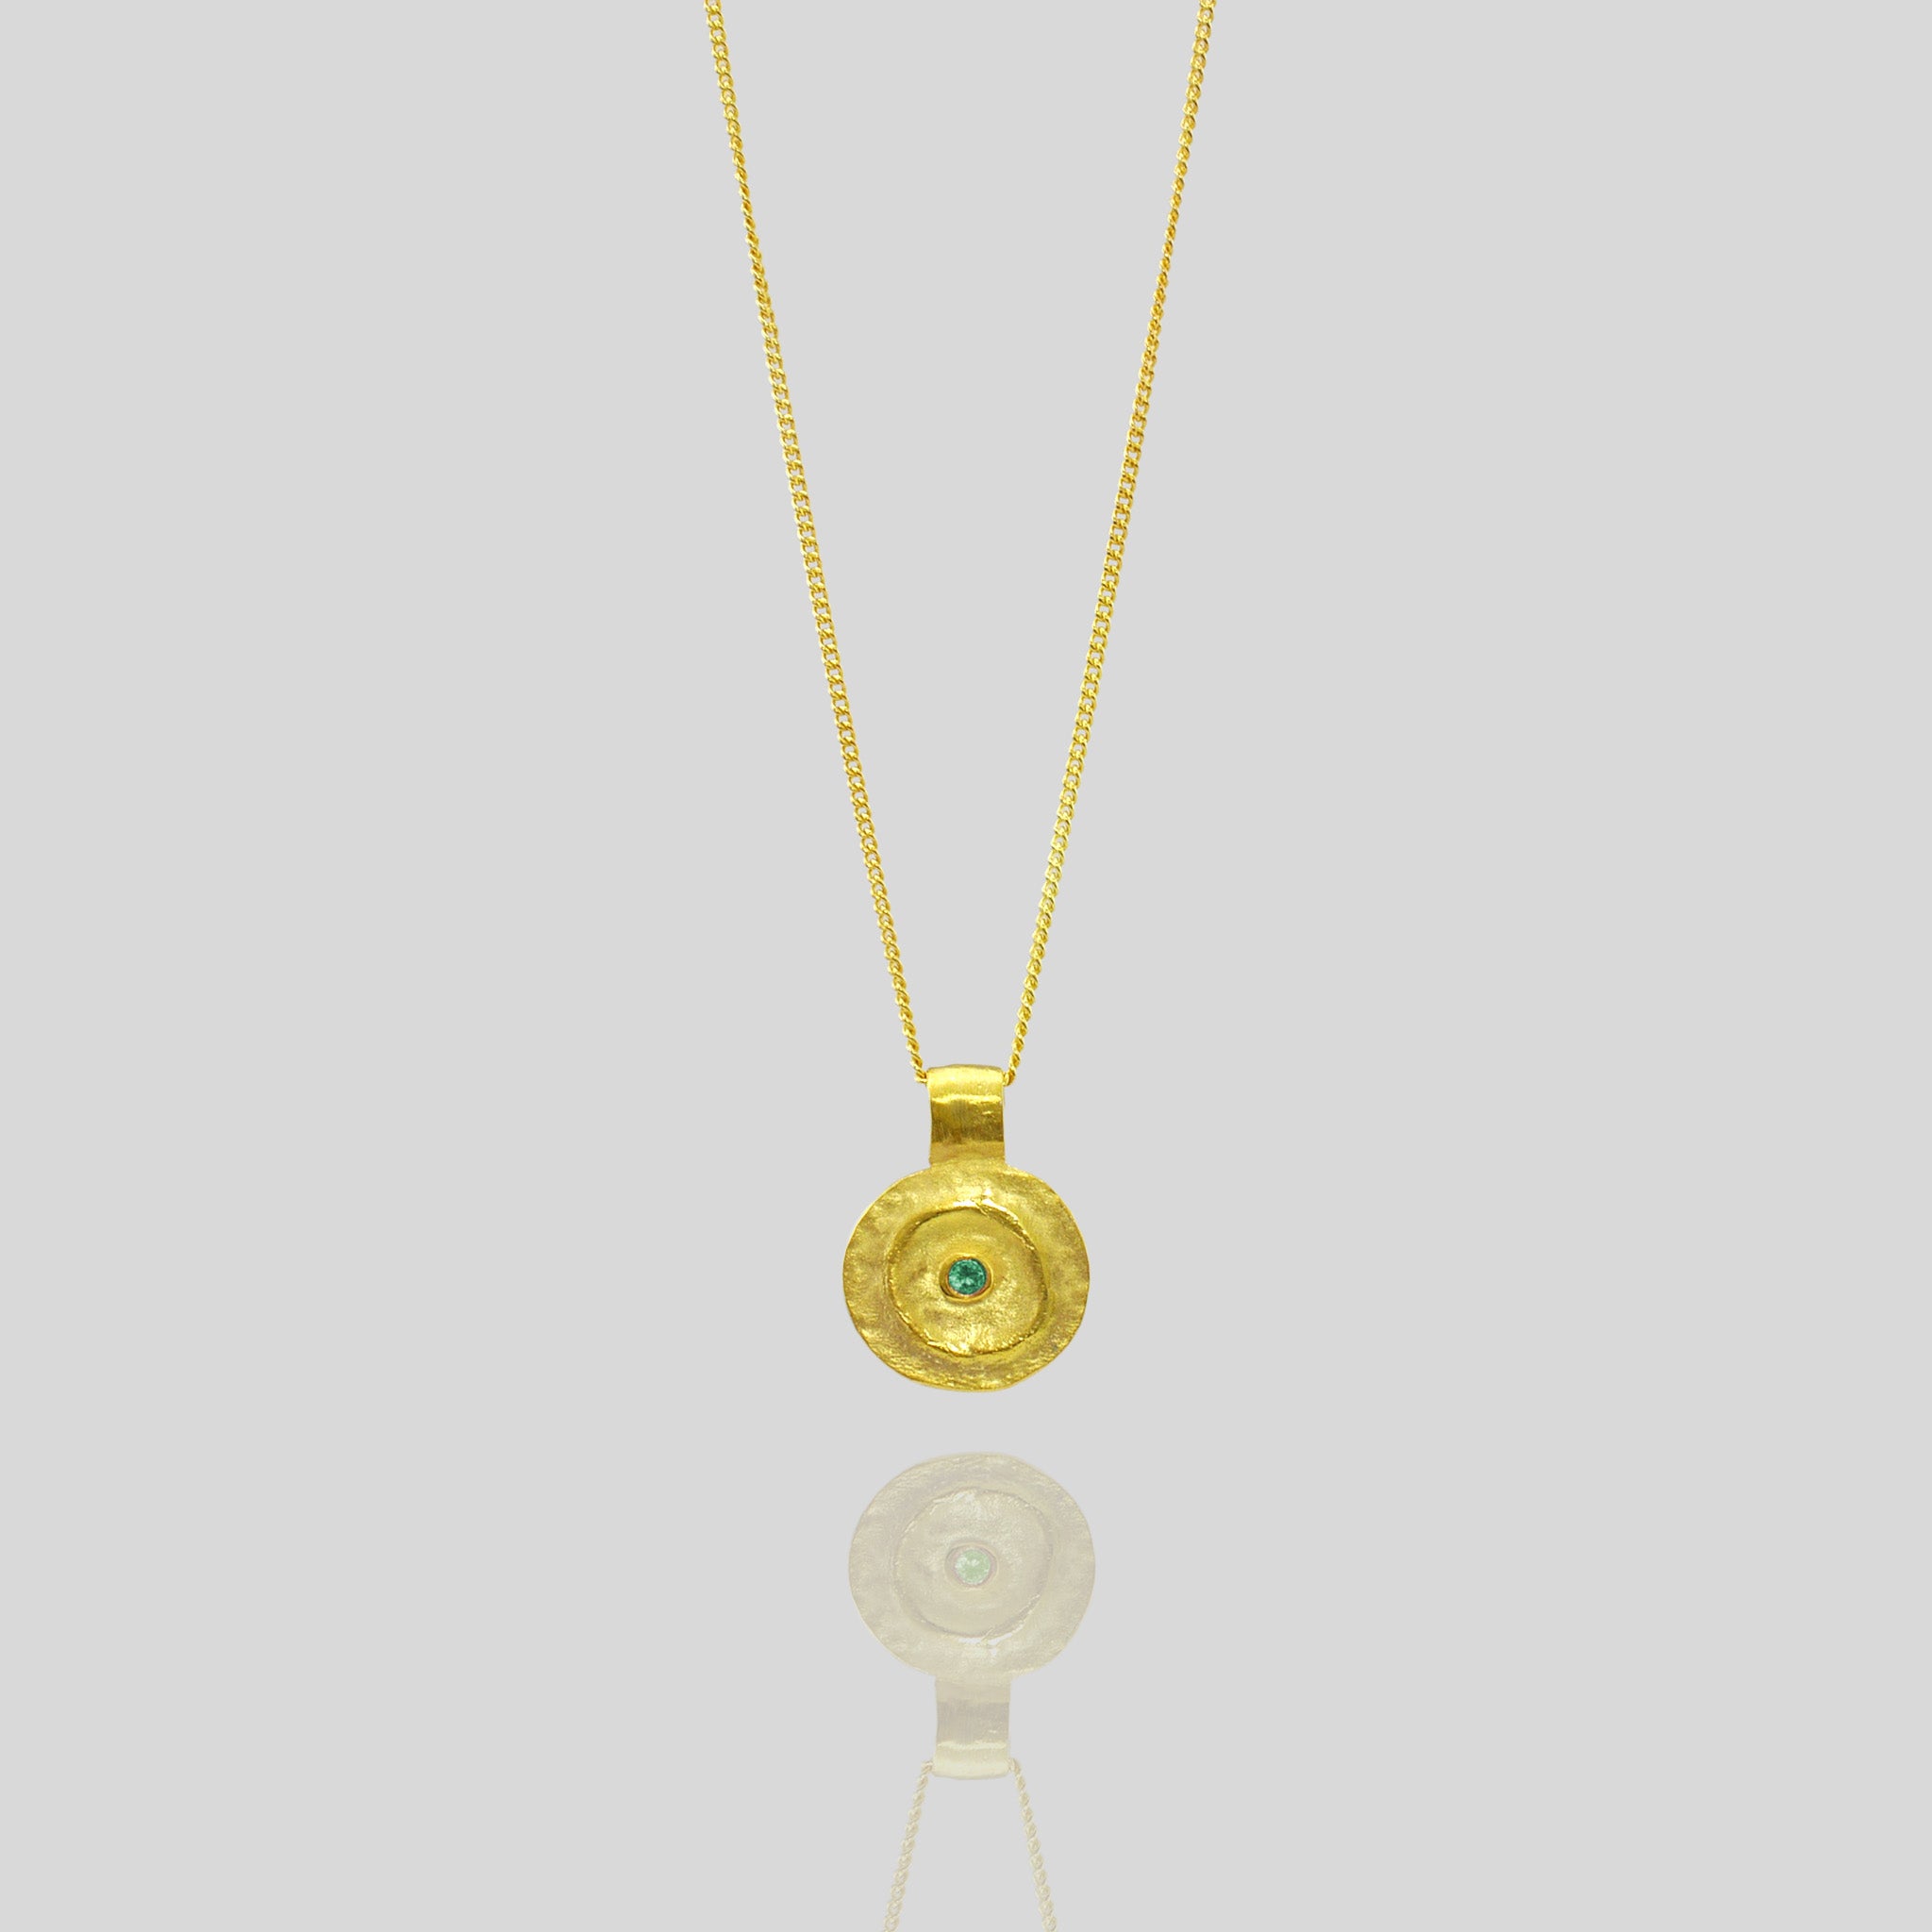 Pharaohs I - Ancient round gold pendant with a vivid Emerald gemstone at its center, reminiscent of the opulent jewelry of the Egyptian Pharaohs' era, crafted from yellow gold.